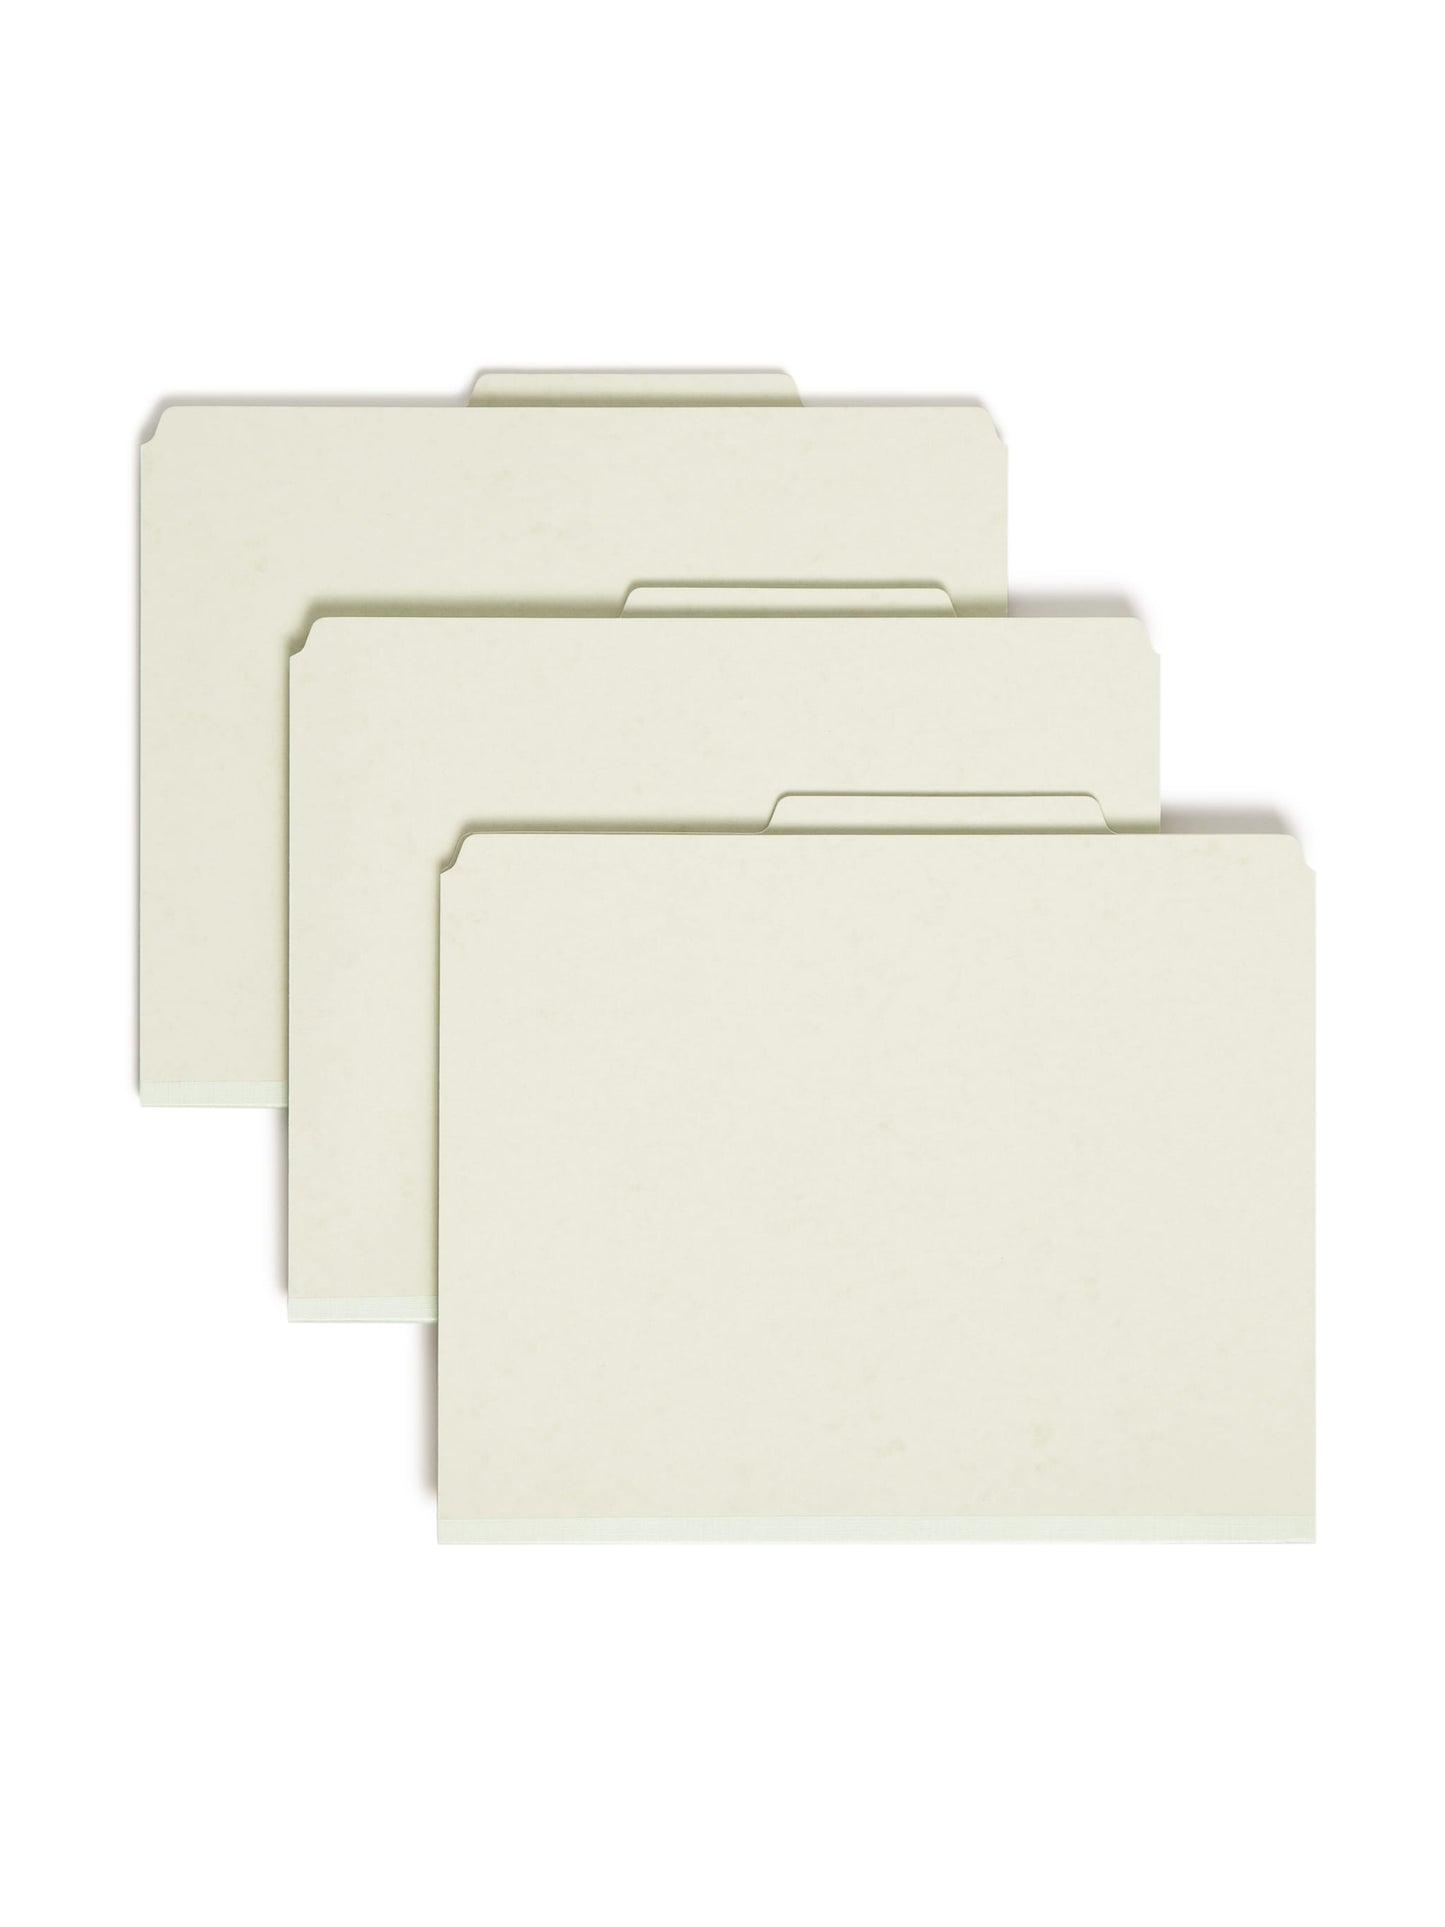 SafeSHIELD® Pressboard Classification File Folders, 2 Dividers, 2 inch Expansion, 2/5-Cut Tab, Gray/Green Color, Letter Size, Set of 0, 30086486140769